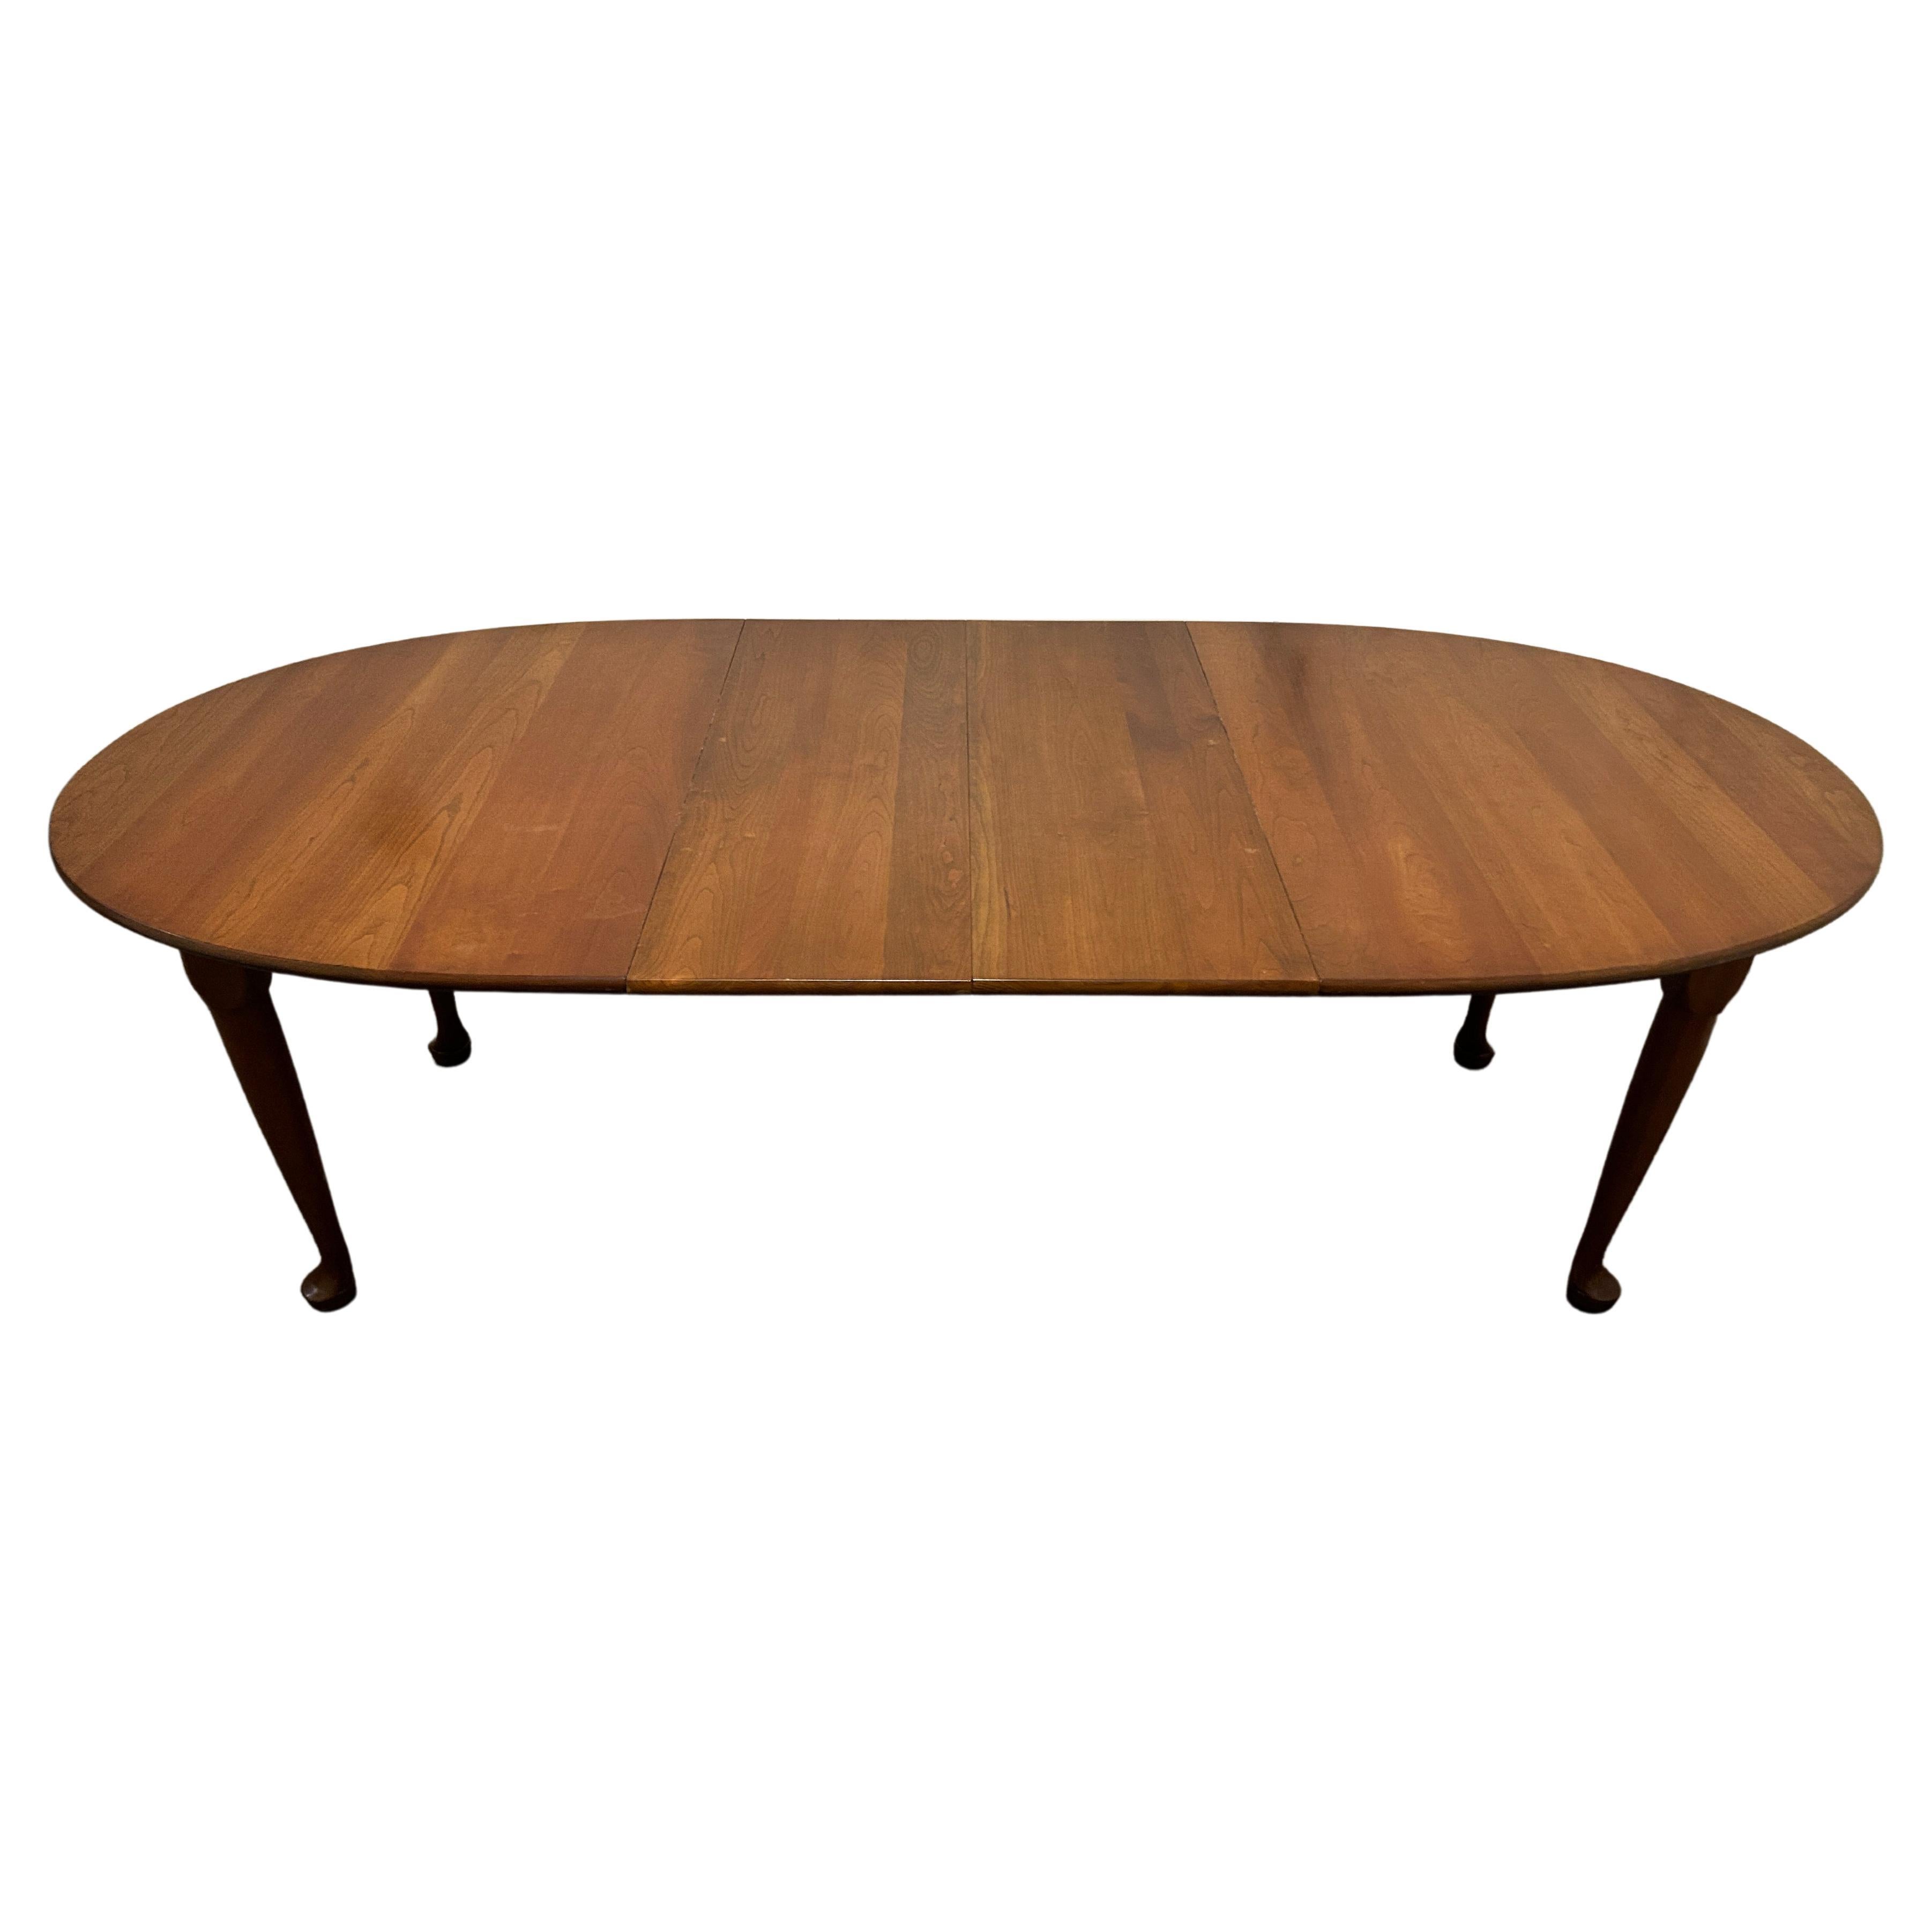 Mid Century Solid cherry oval dining table with 2 leaves by Stickley